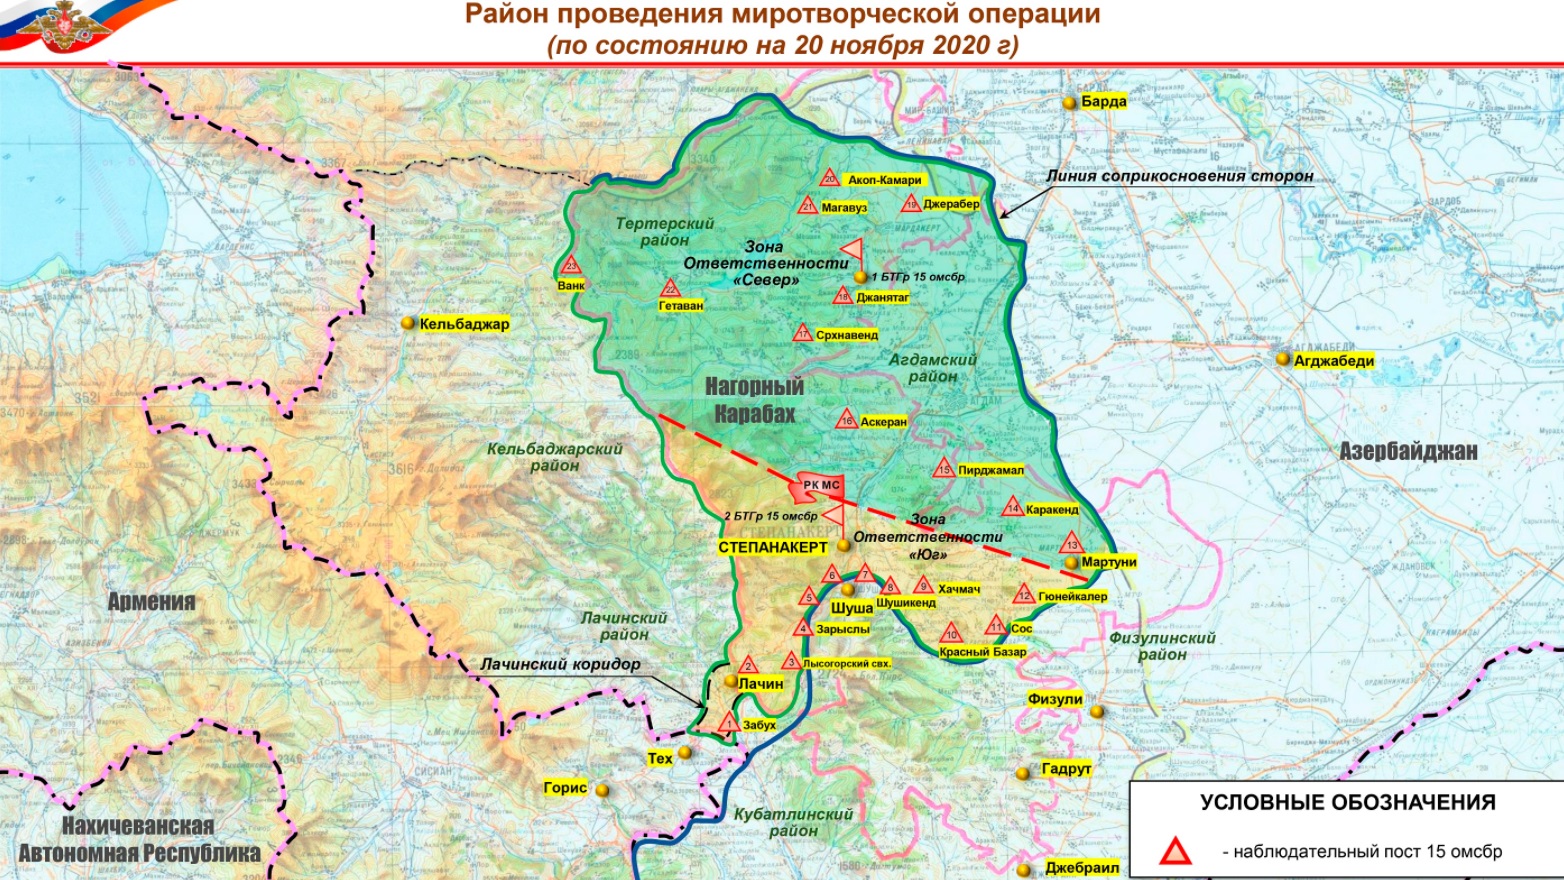 Briefing by the head Of the Department of information and mass communications of the Russian defense Ministry, major General I. E. Konashenkov. Information Bulletin of the Ministry of defense of the Russian Federation on the deployment of the Russian military contingent of the peacekeeping forces in the Nagorno-Karabakh conflict zone (for November 20, 2020)